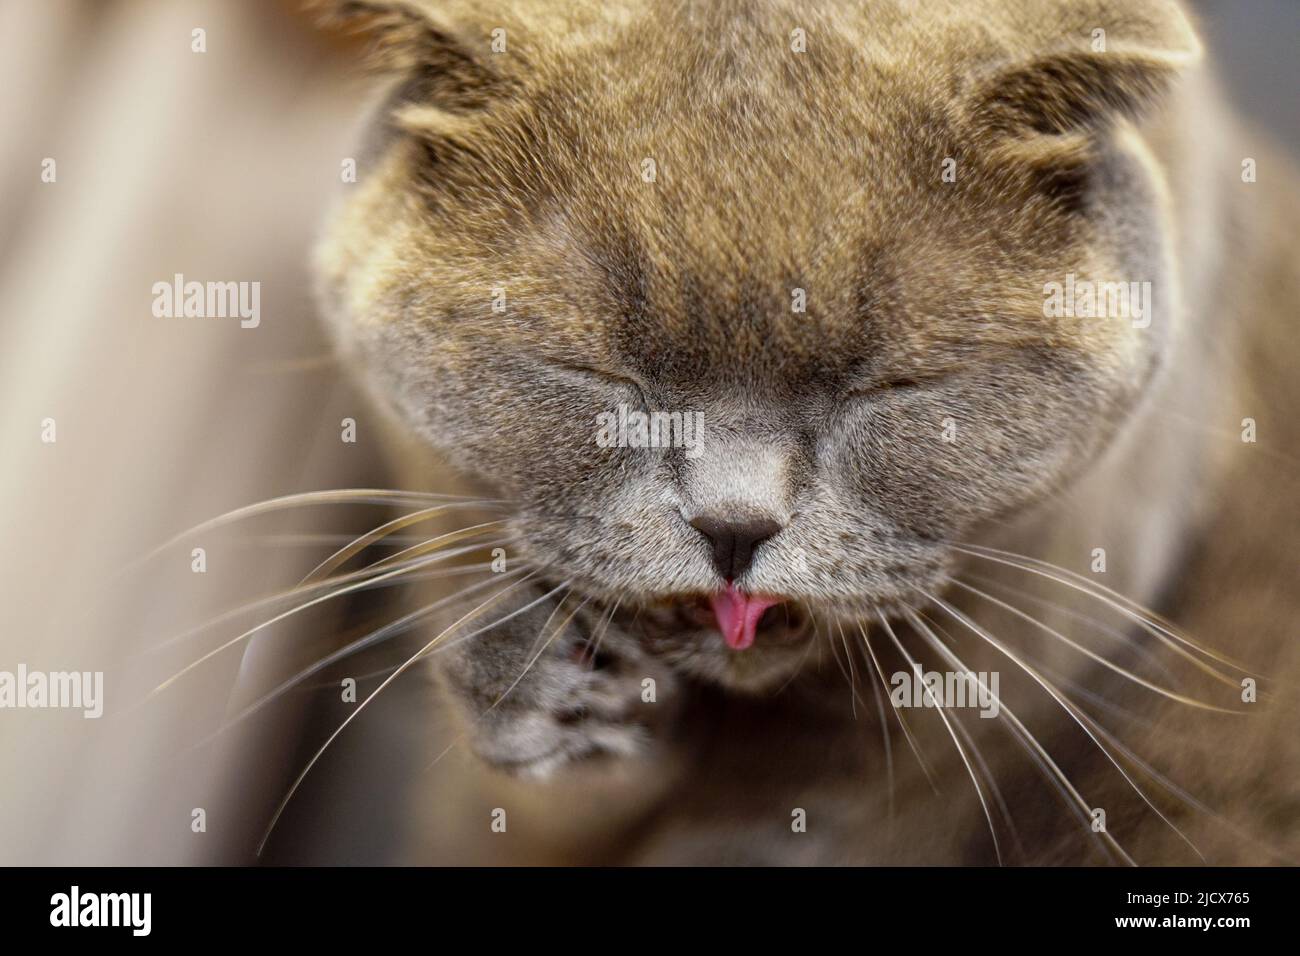 Cute scottish fold cat cleaning her fur with tongue close up view with shallow depth of field Stock Photo